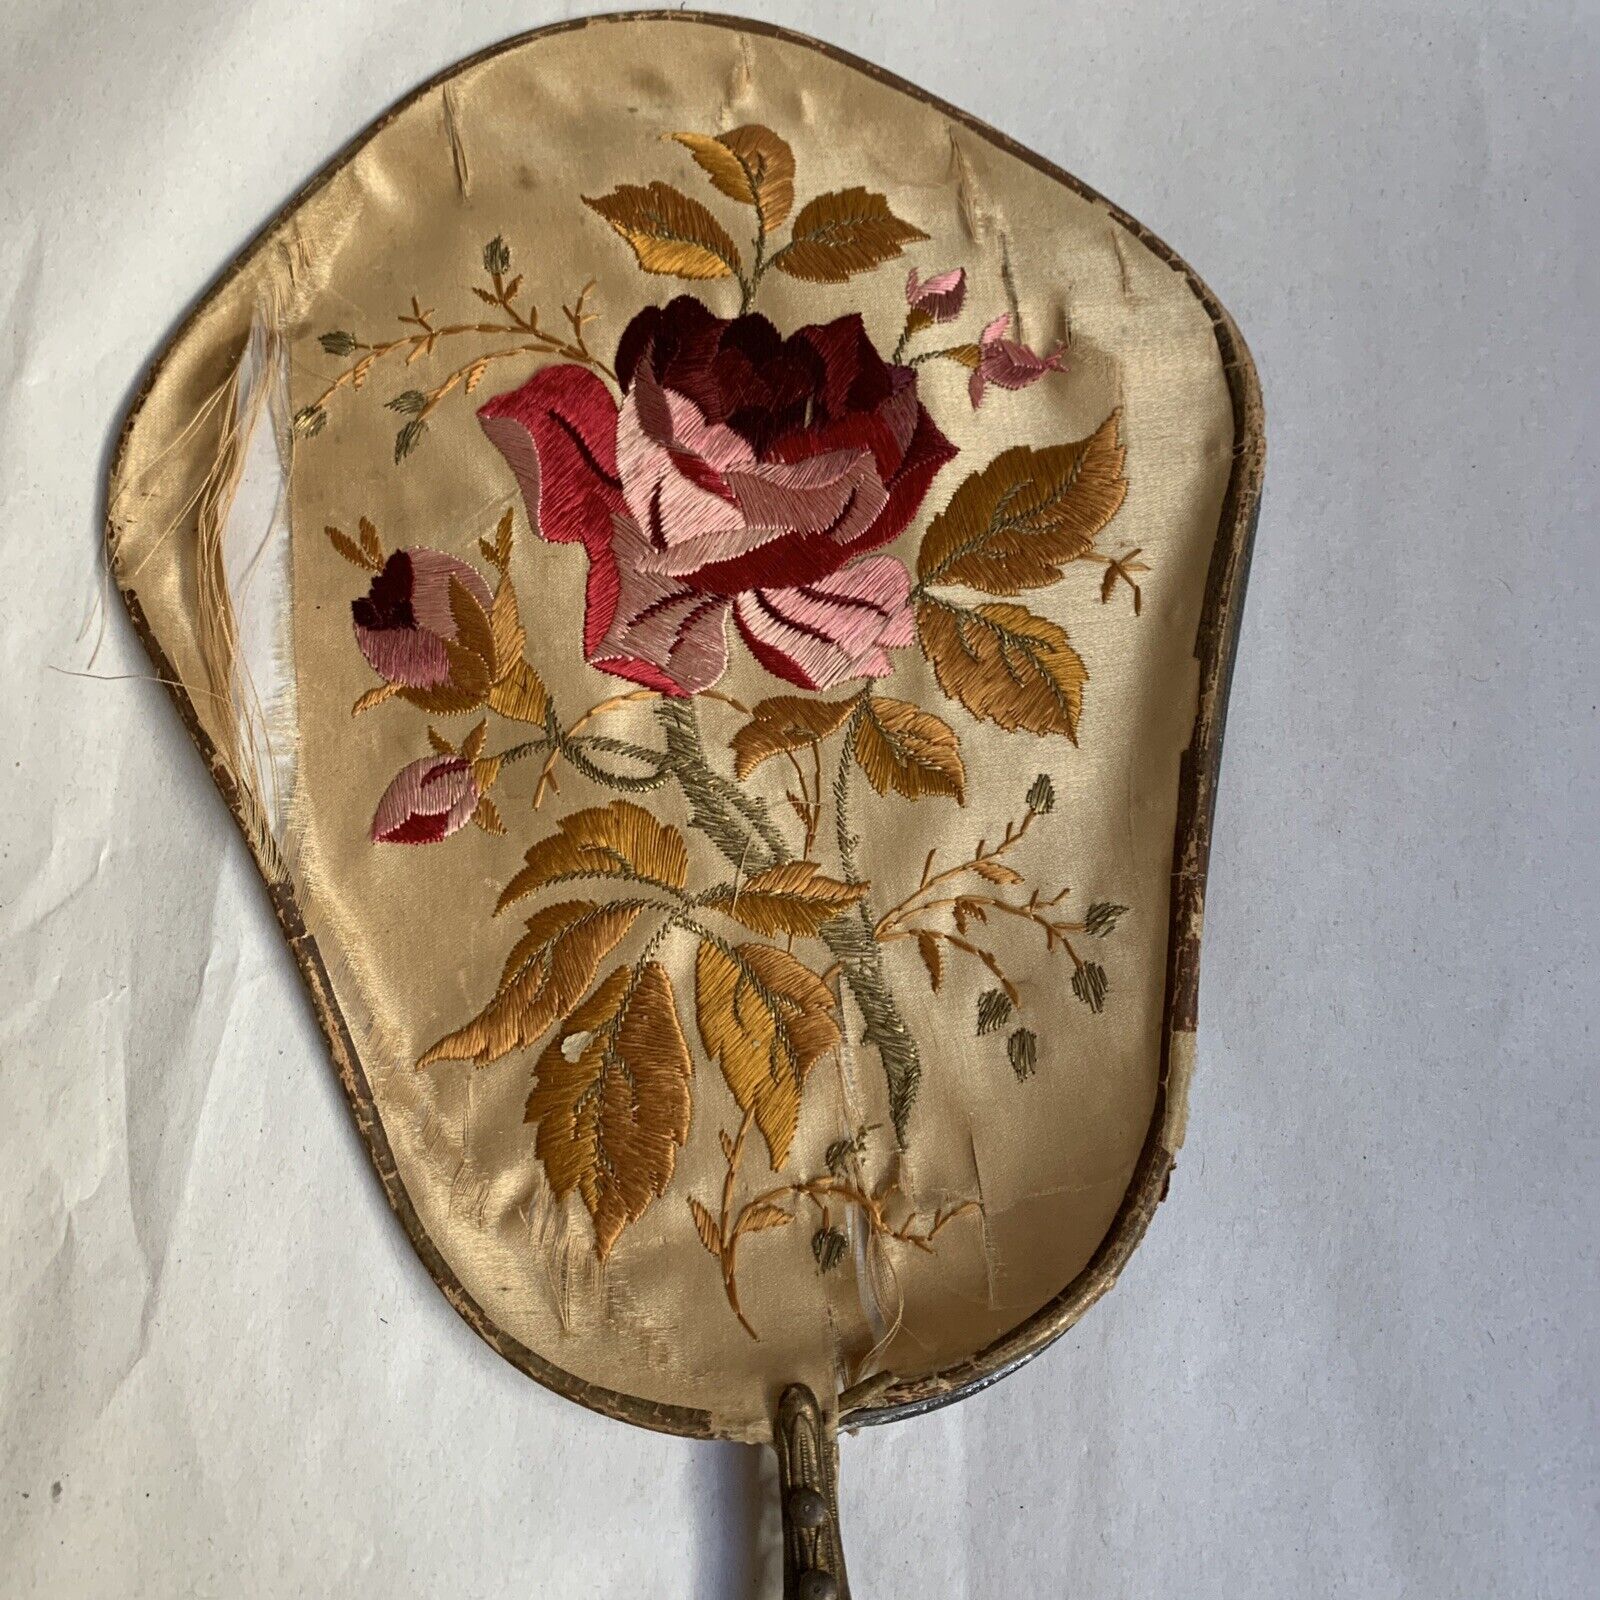 ANTIQUE METAL VICTORIAN HAND FAN EMBROIDERED FLORAL ON SILK 14